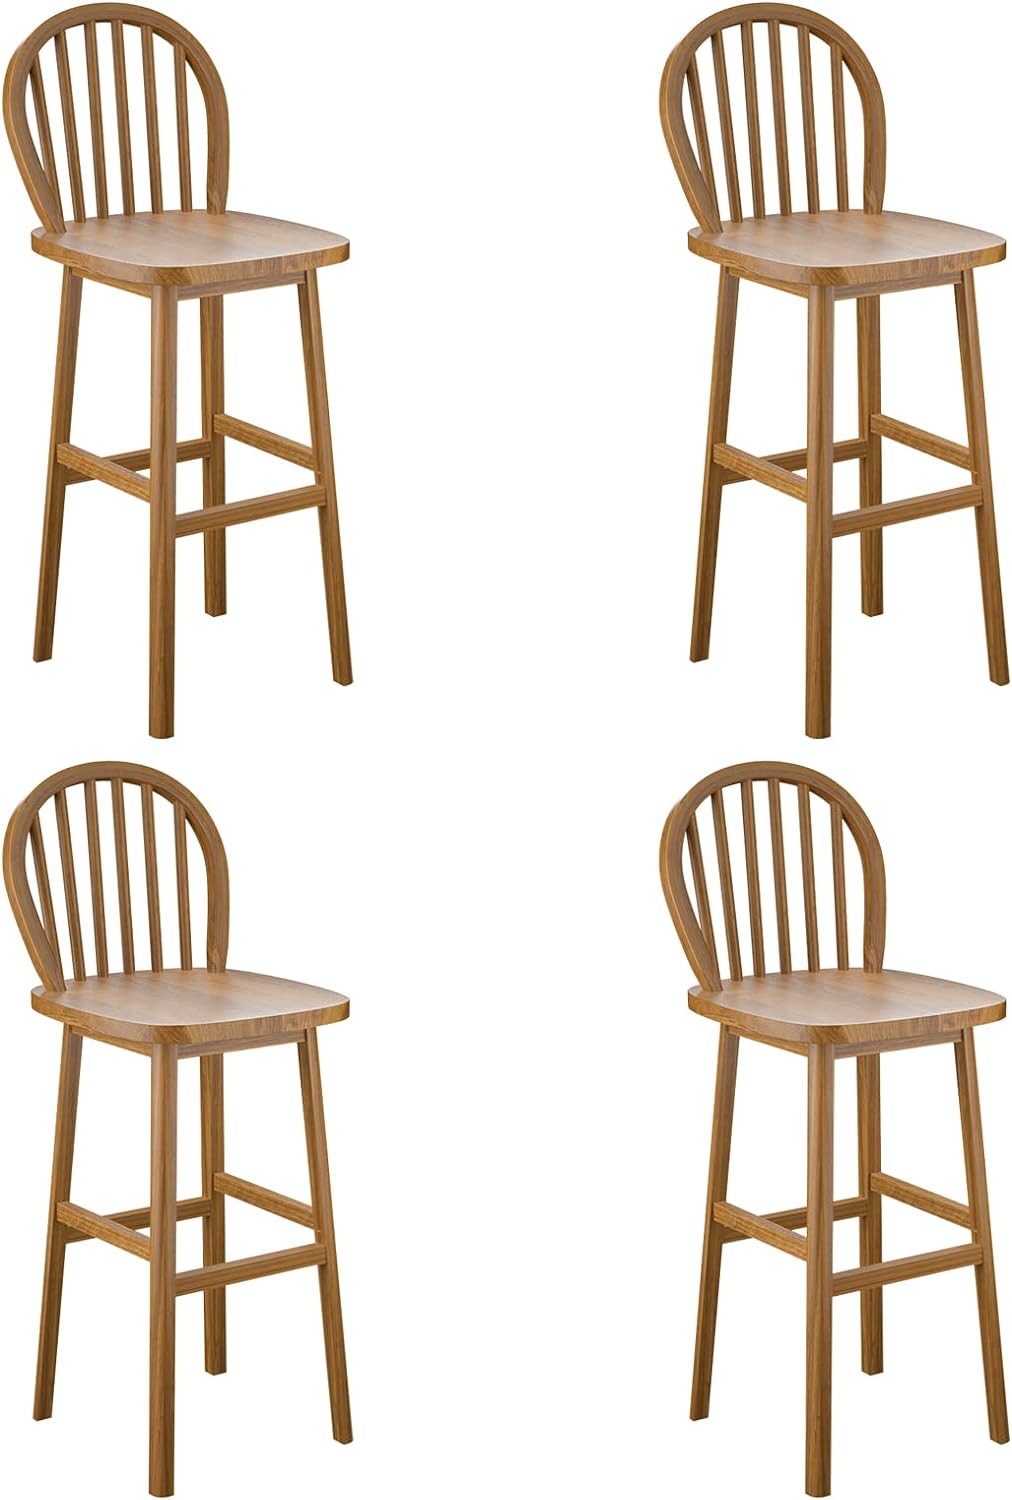 COSTWAY Windsor Bar Stool Set of 4, 30 Inch Bar Height Bar Stools with Back, Footrests, Easy Assembly, Rubber Wood Bar Height Bar Chairs for Kitchen Island, Dining Room, Bar, Pub, Bistro, Natural (4)